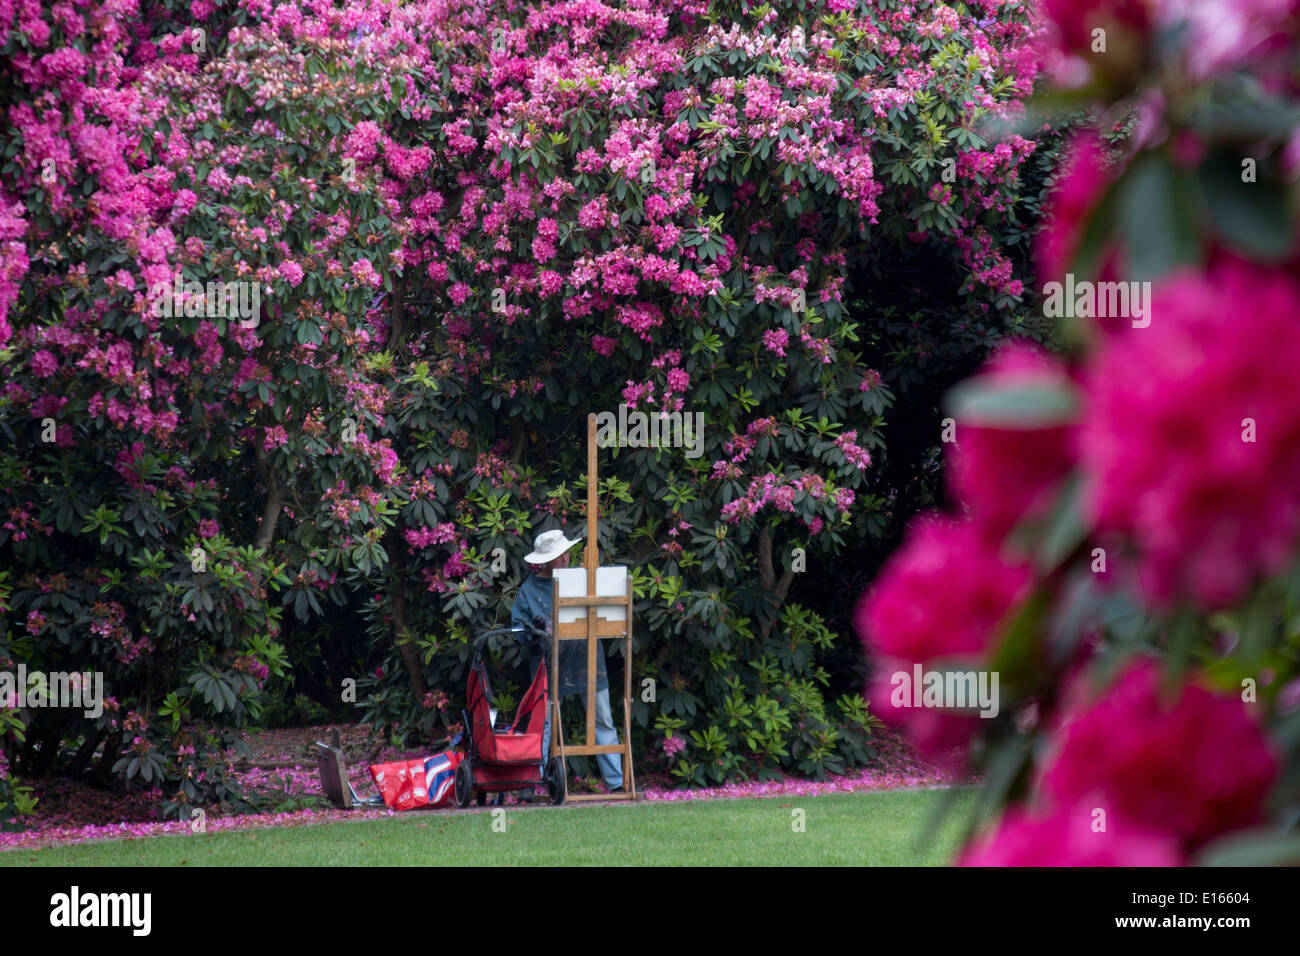 Male artist painter with easel painting surrounded by rhododendron flowers in spring Kenwood House Gardens London England UK Stock Photo